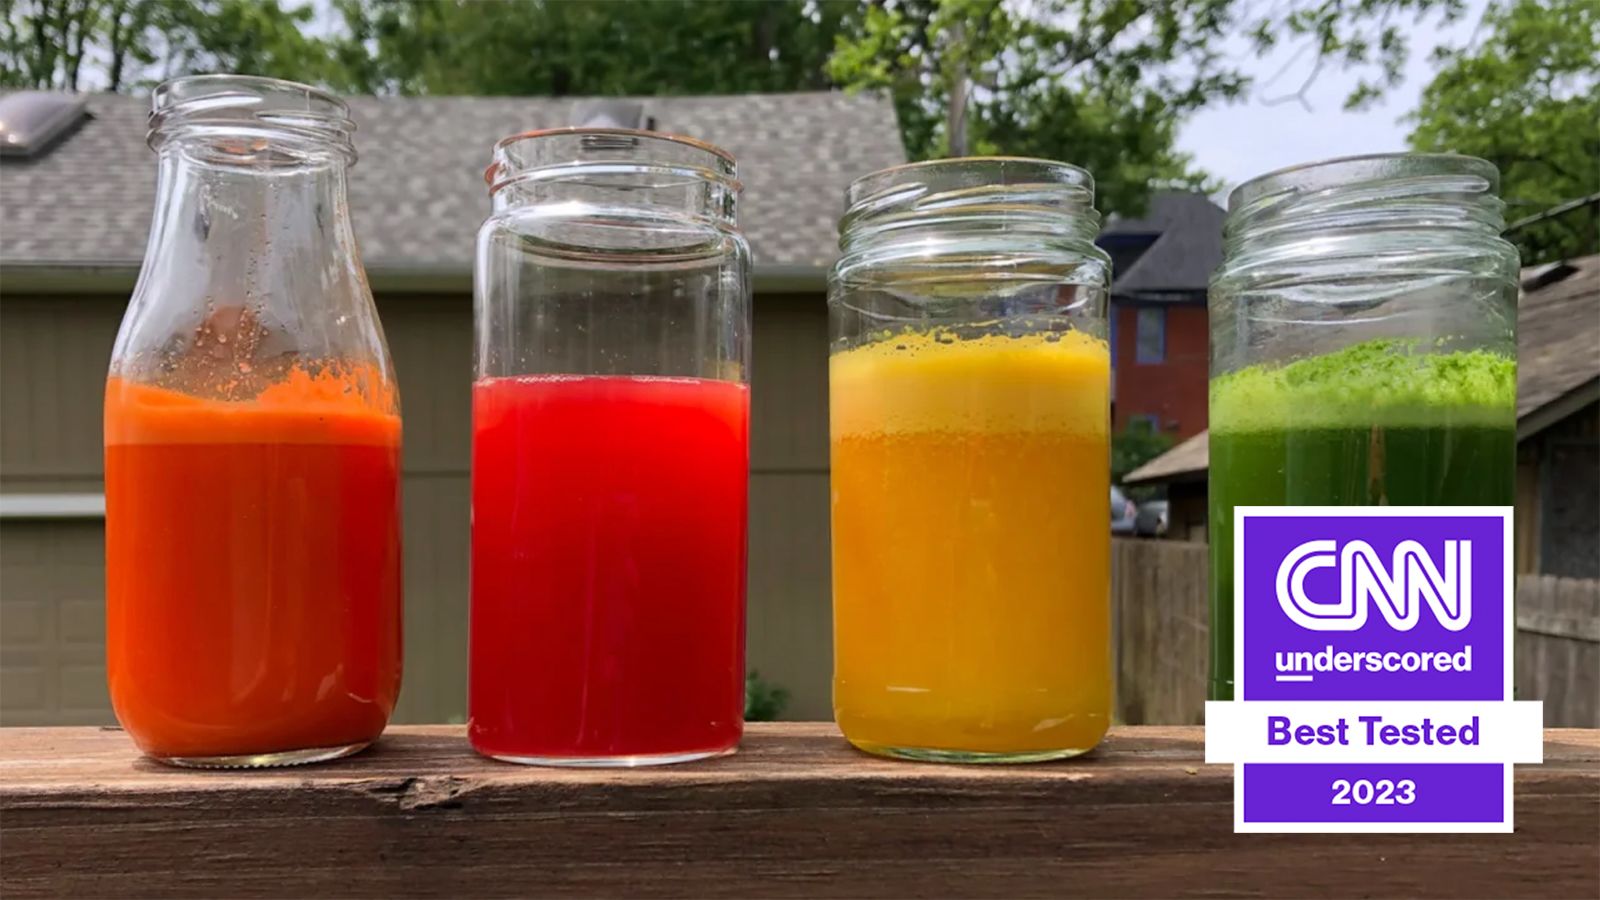 If you're juicing, you need these glass bottles from